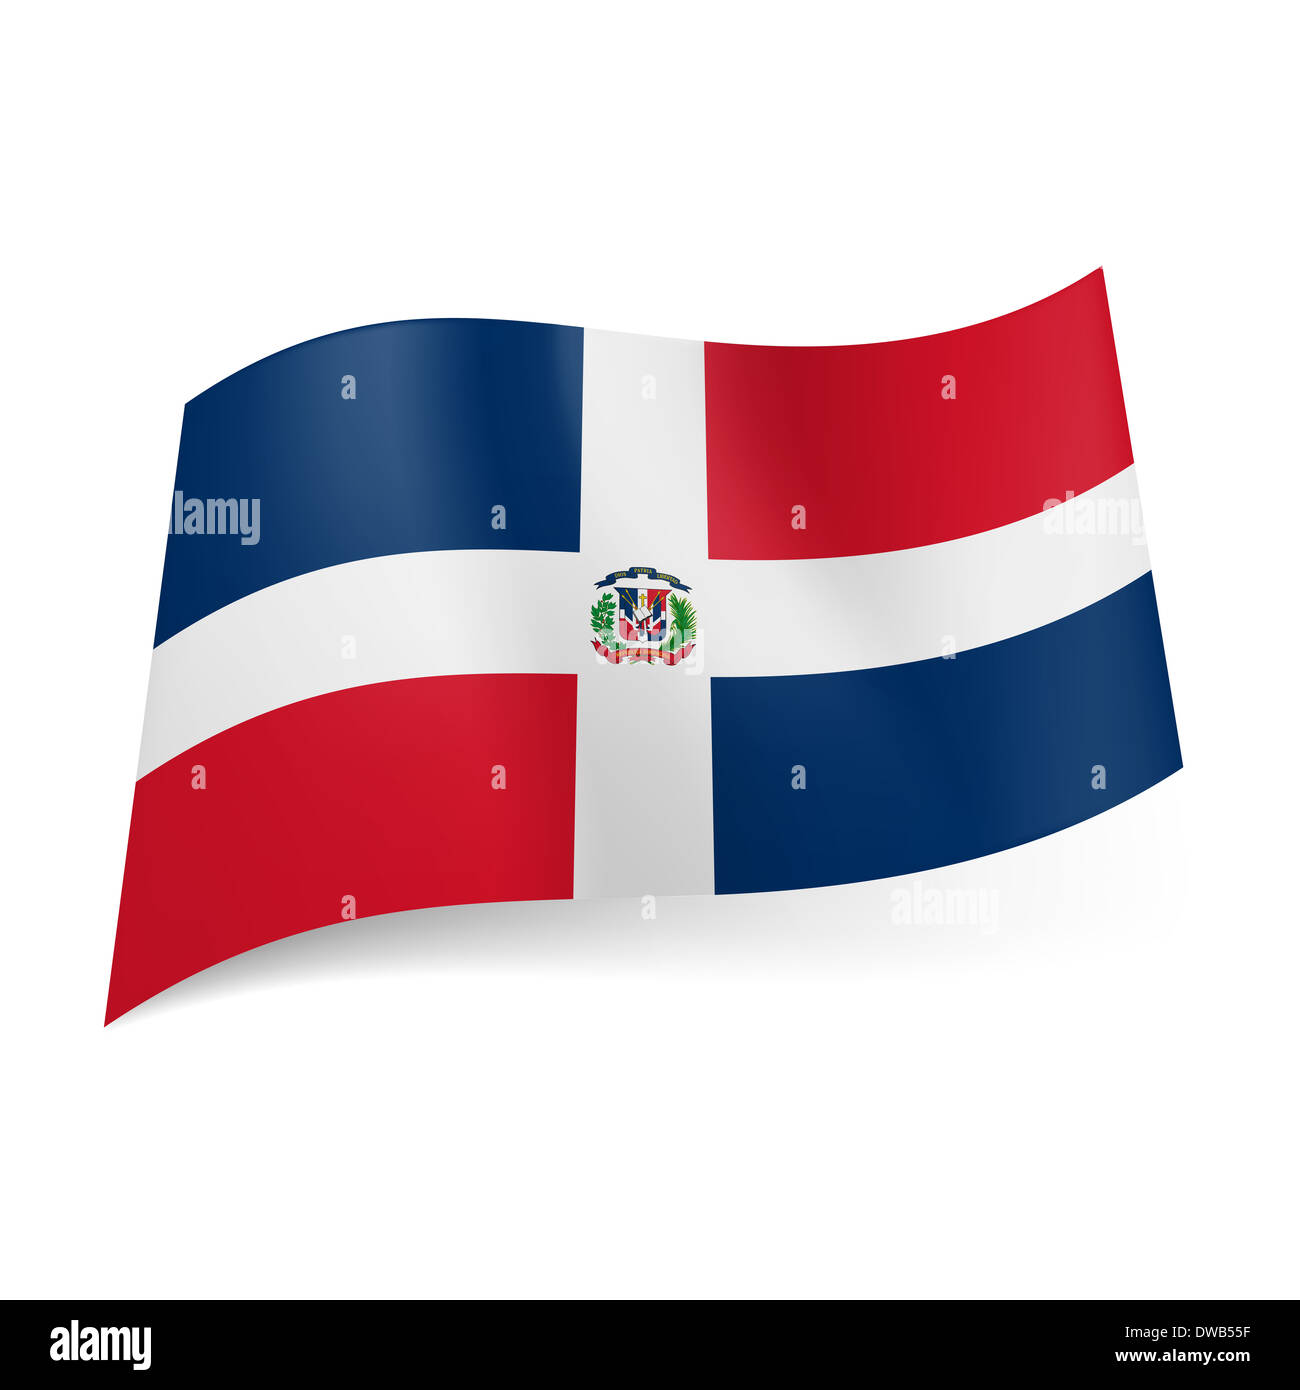 Empirisk maling lærer National flag of Dominican Republic: white cross with coat-of-arms, four red  and blue rectangles Stock Photo - Alamy